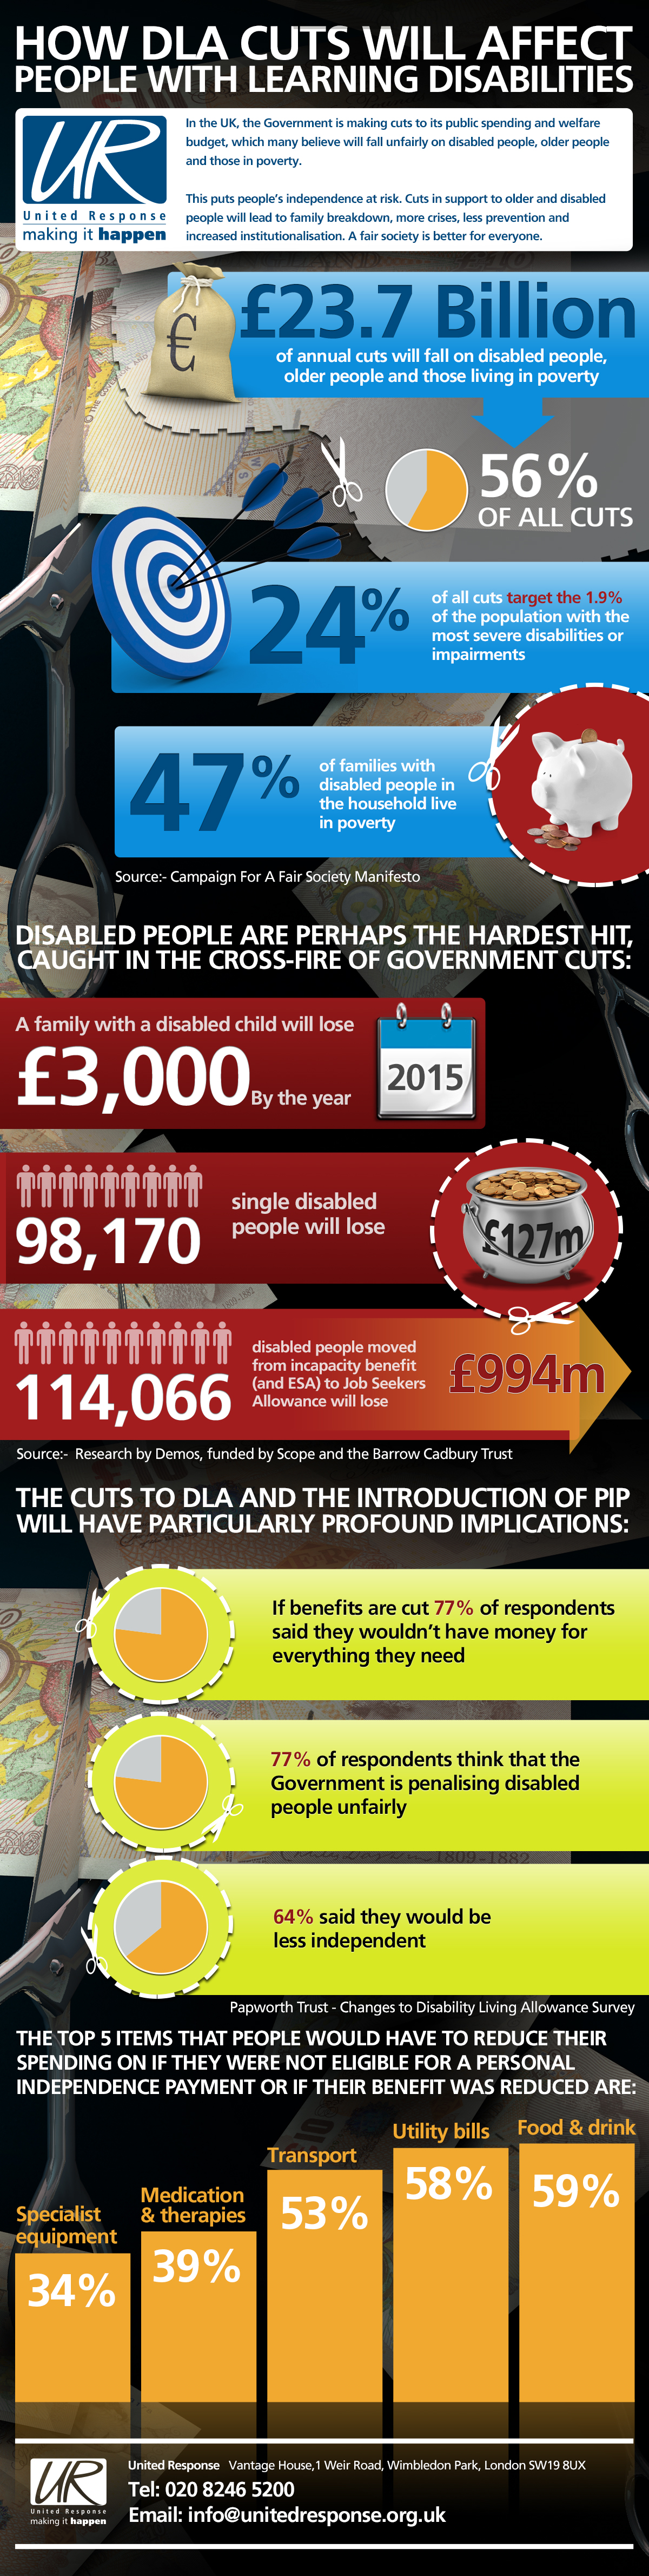 How DLA Cuts Affect People with Learning Disabilities